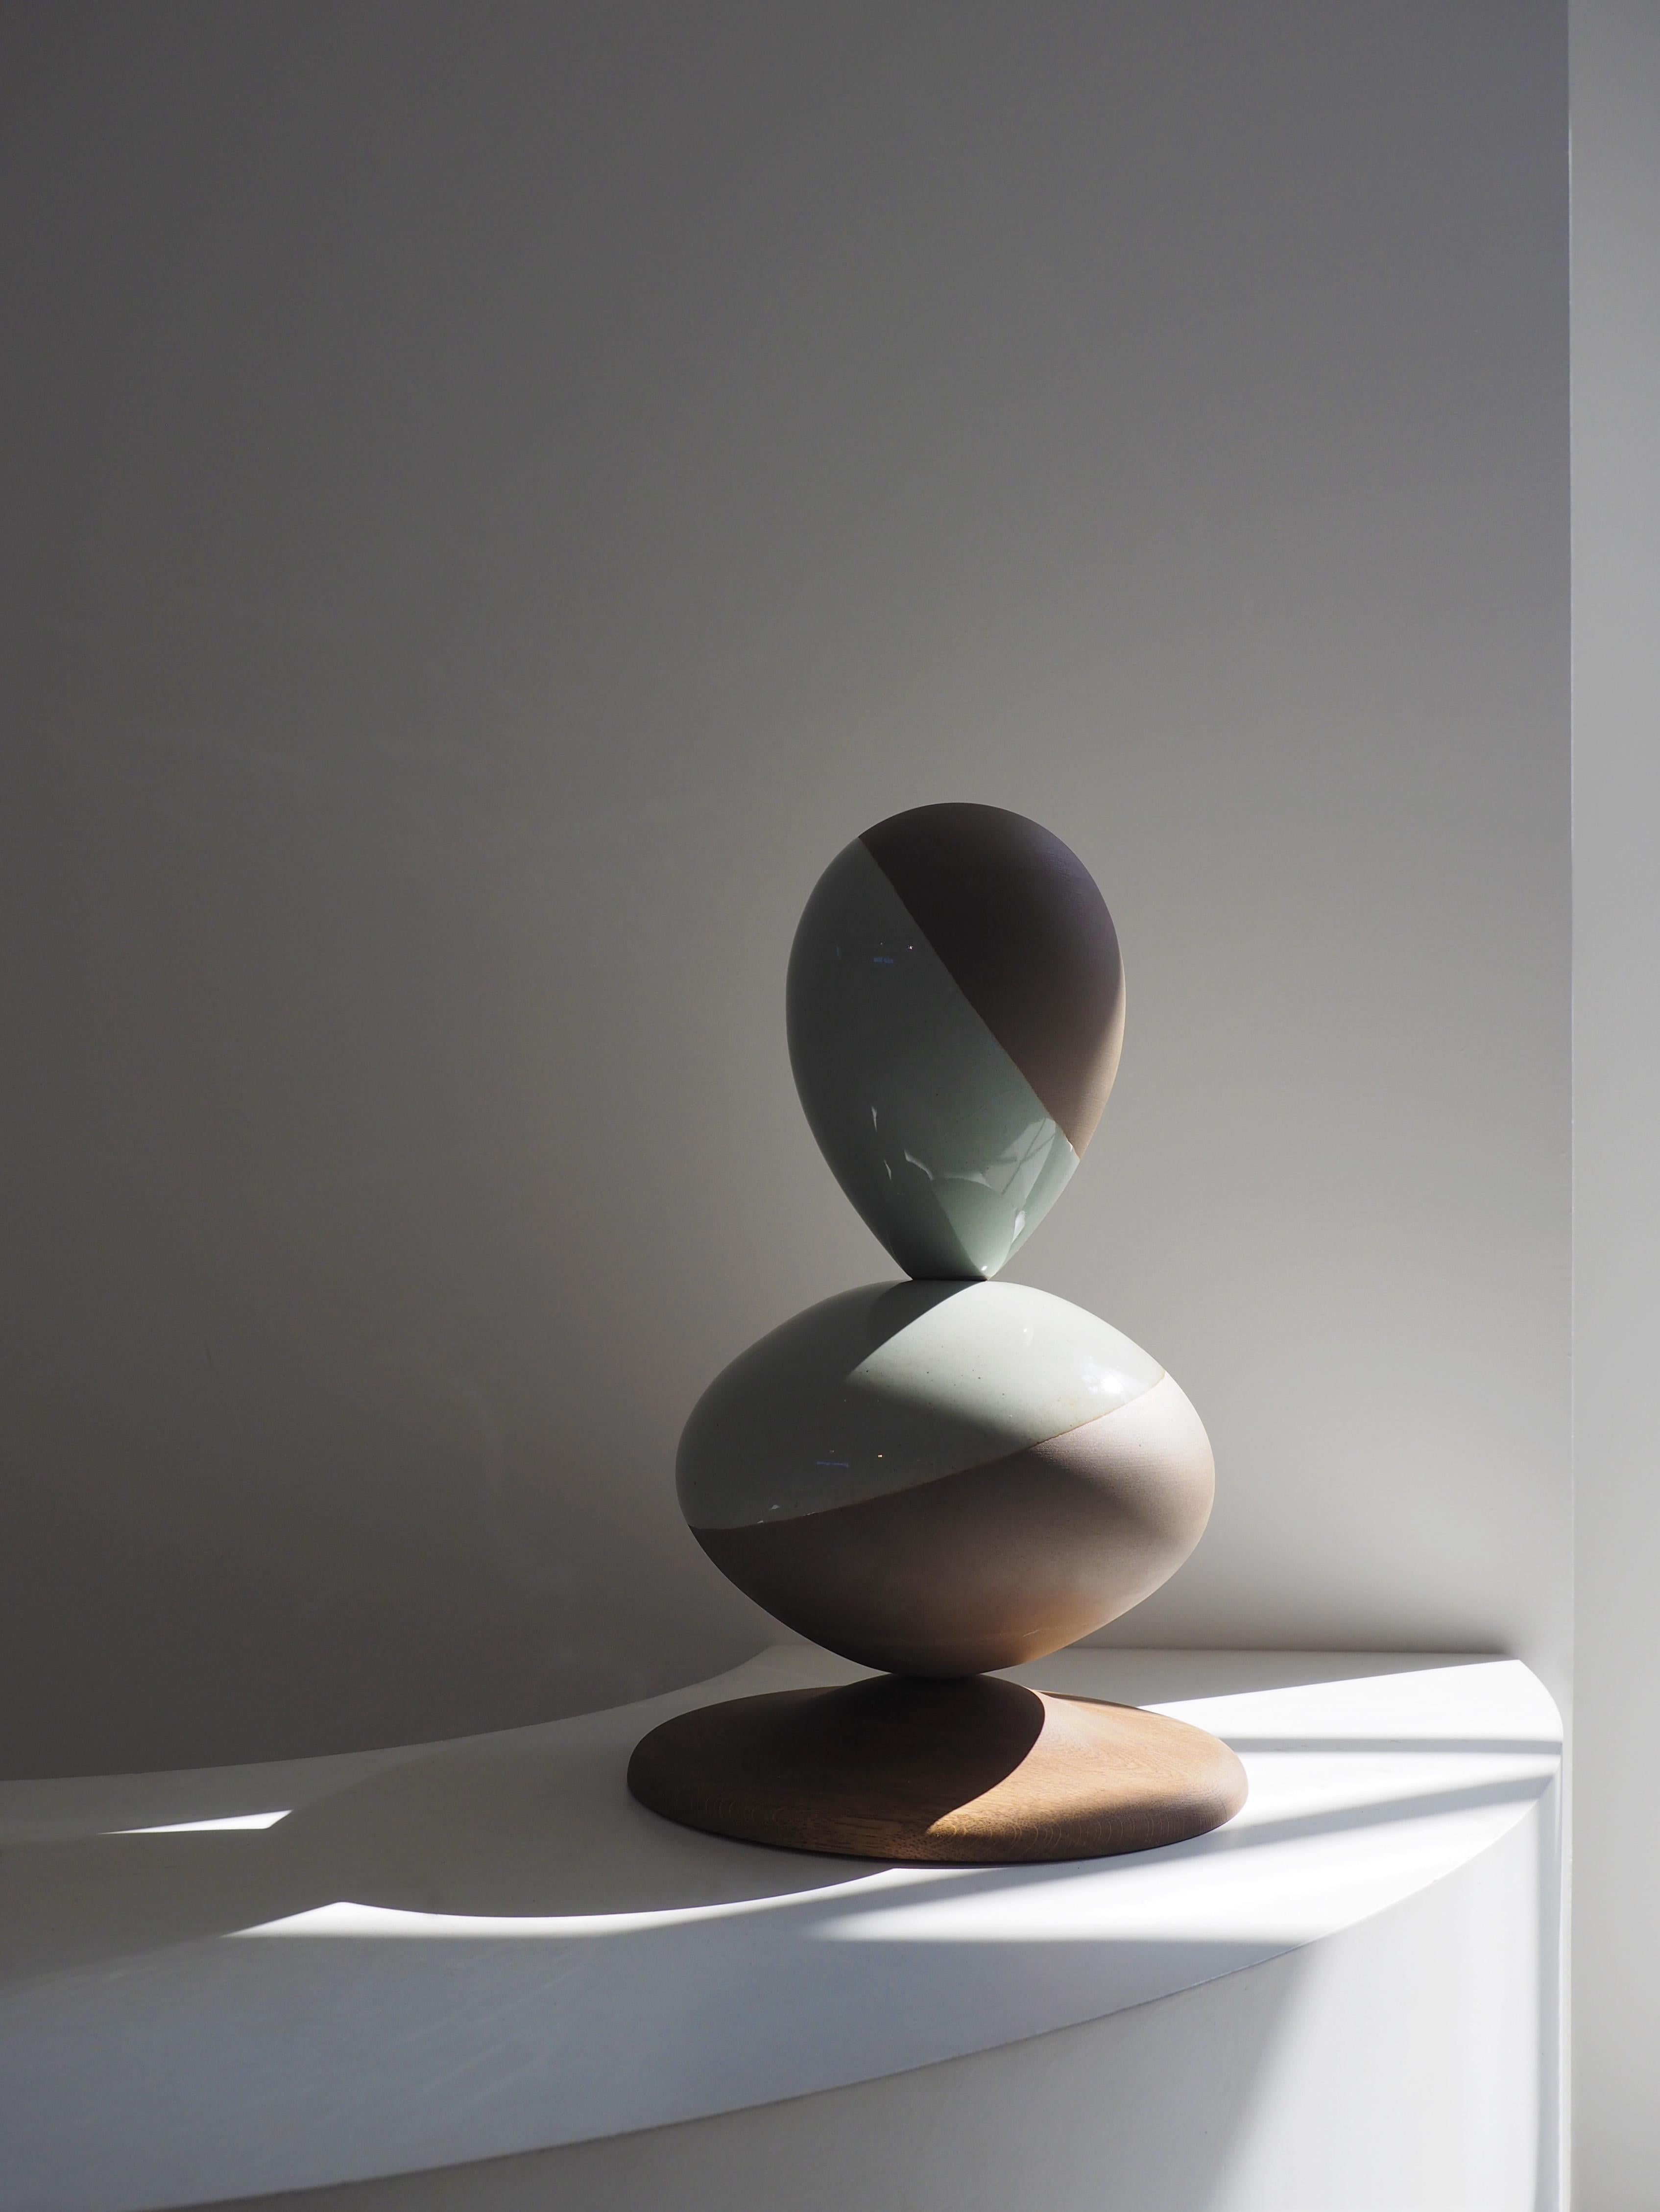 Stack sculpture Pair by Soo Joo is a stack sculpture made in Korean Ceramic. It is a timeless form, reminiscent of a pair of perfectly balanced river stones. The stack sculpture series is created with traditional Korean aesthetics in mind, using